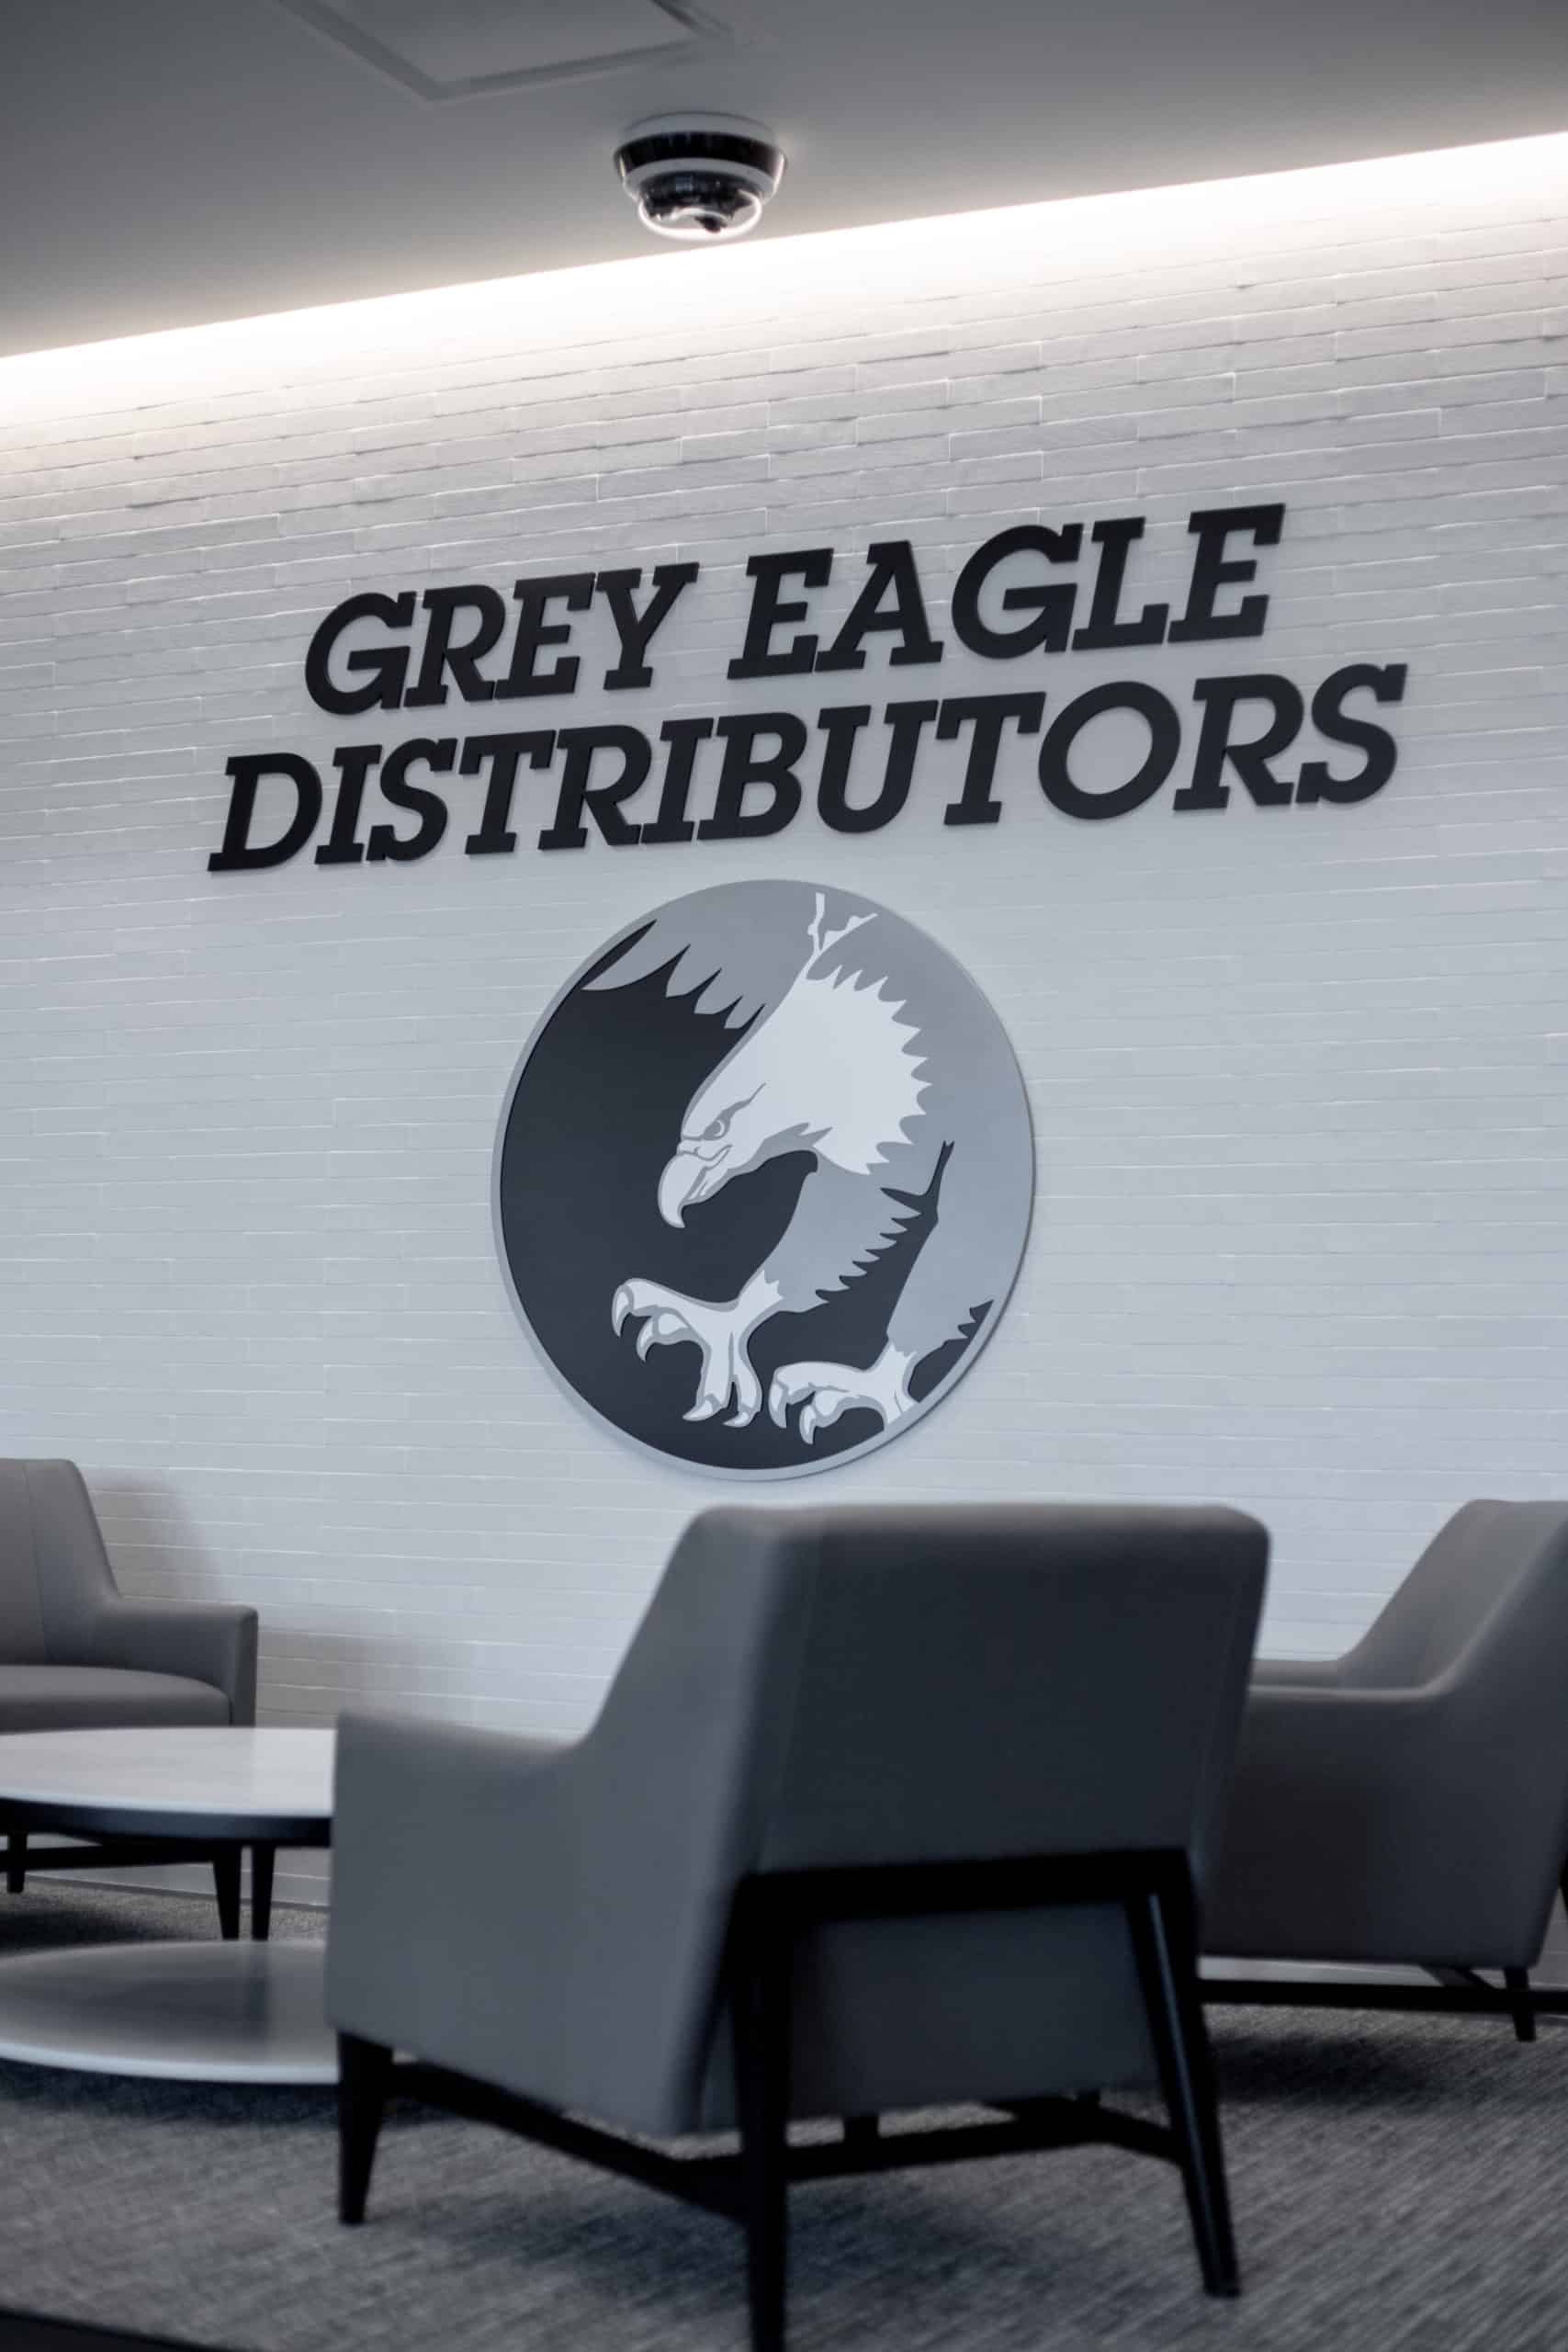 Monotone Lobby and signs for Anheuser Buch Grey Eagle Distribution